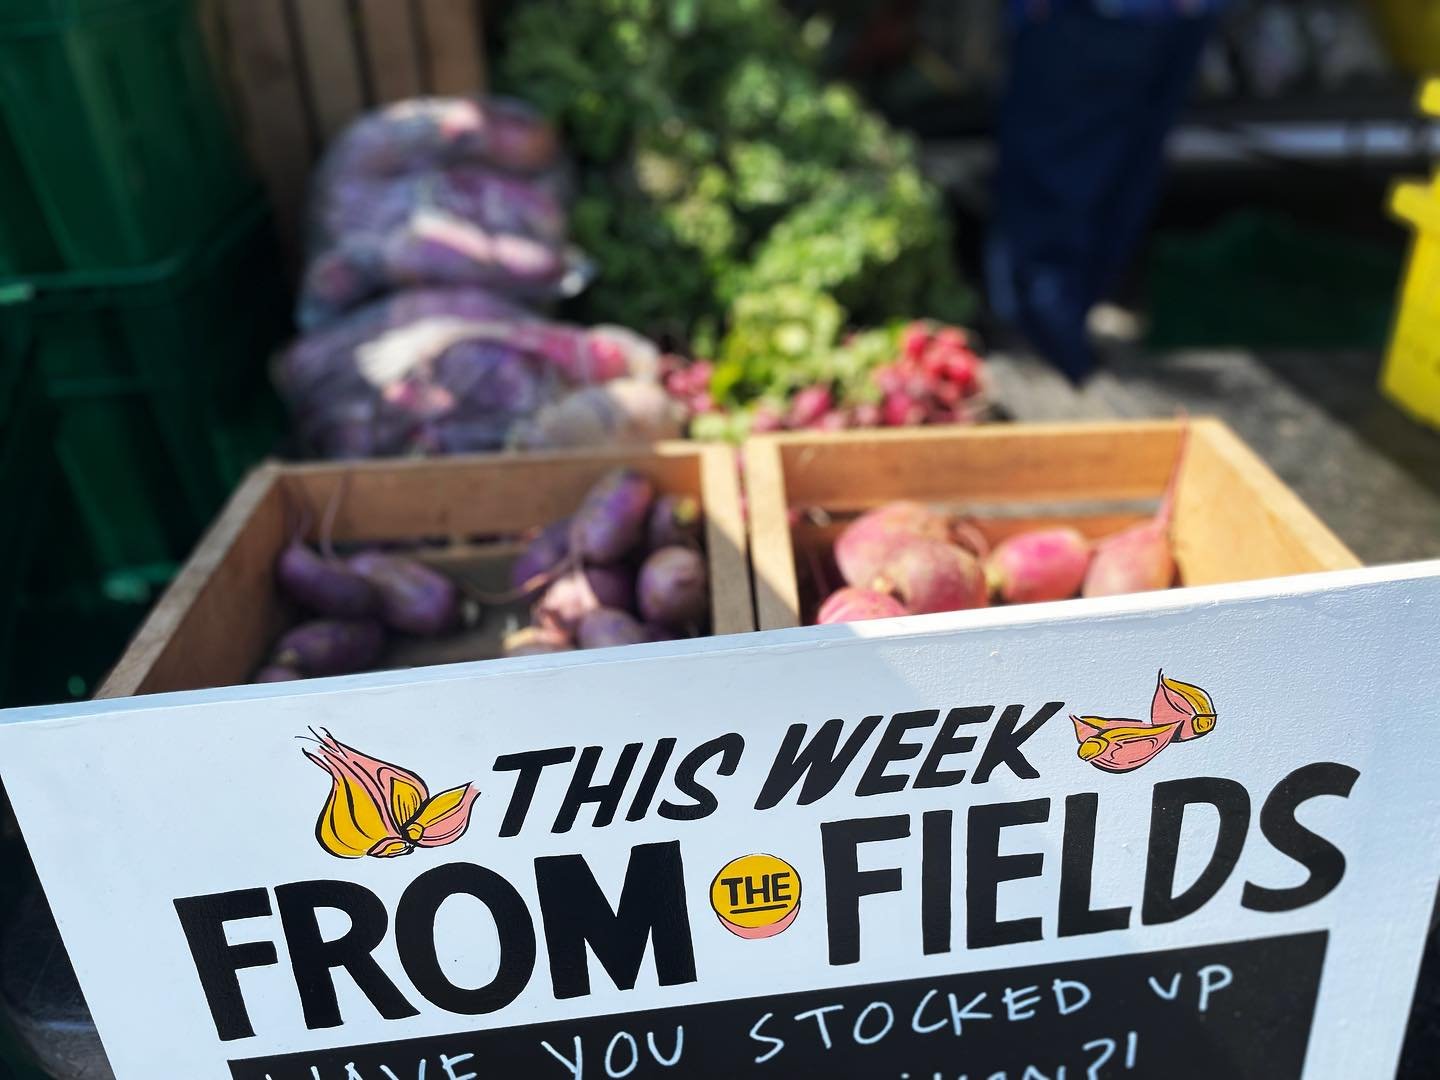 Stock up on what&rsquo;s fresh with @longseasonfarm 

Every Sunday. 10-2. @beaconfarmersmarket Voted BEST FARMERS&rsquo; MARKET by @hudsonvalleymag

#BeaconFarmersMarket #CommunityStrong #farmersmarkets #thingstodoinbeacon #thingstodohudsonvalley #ny